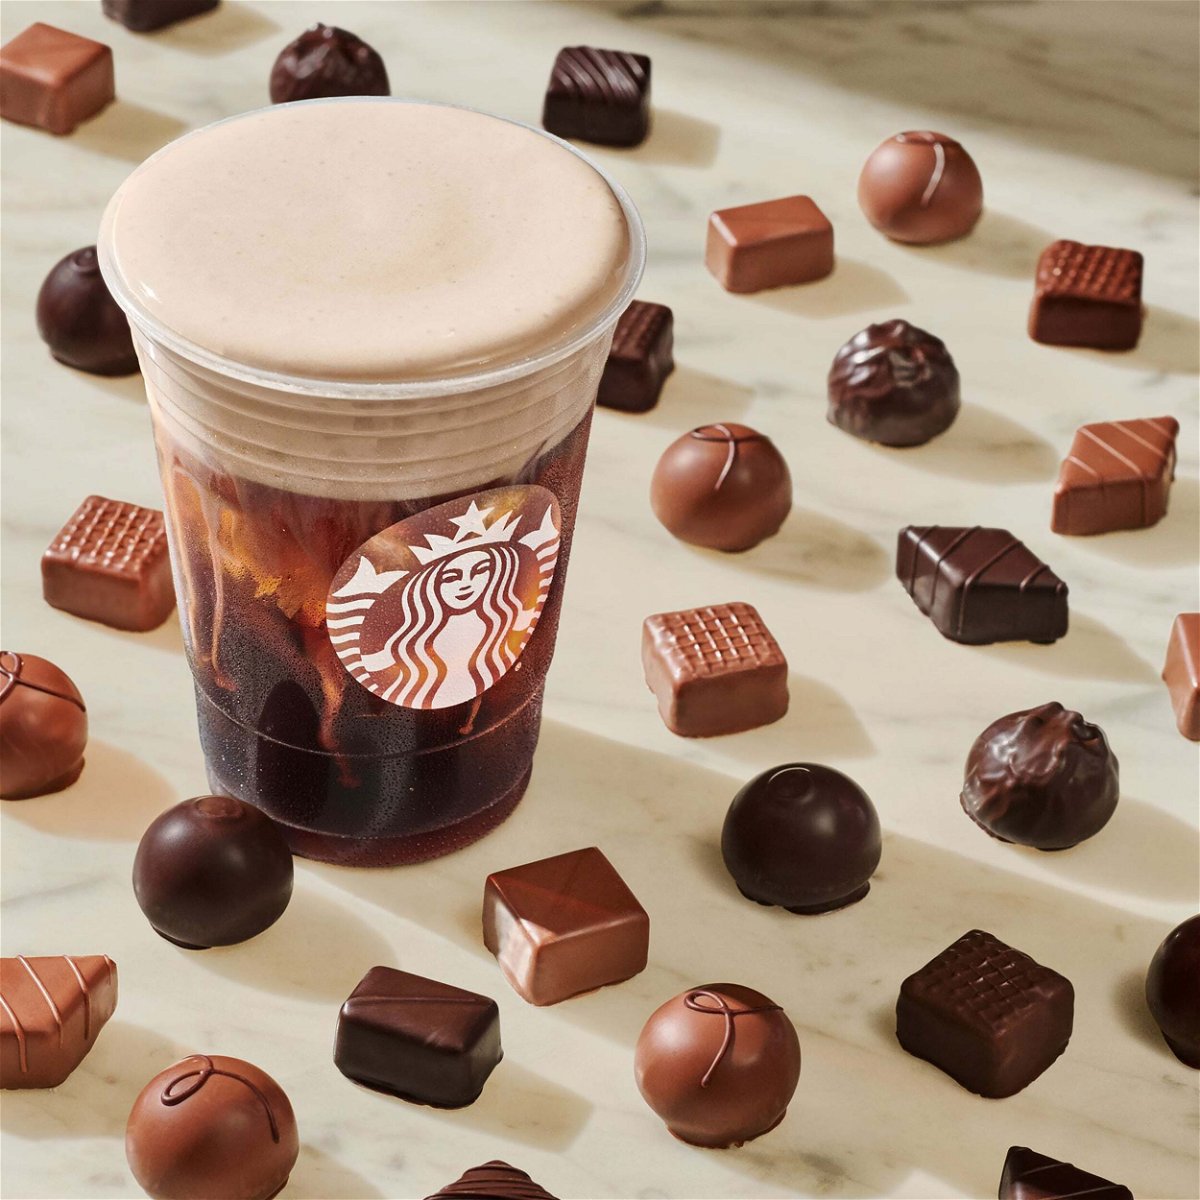 <i>From Starbucks</i><br/>Starbucks has added a chocolate cream cold brew coffee to menus.